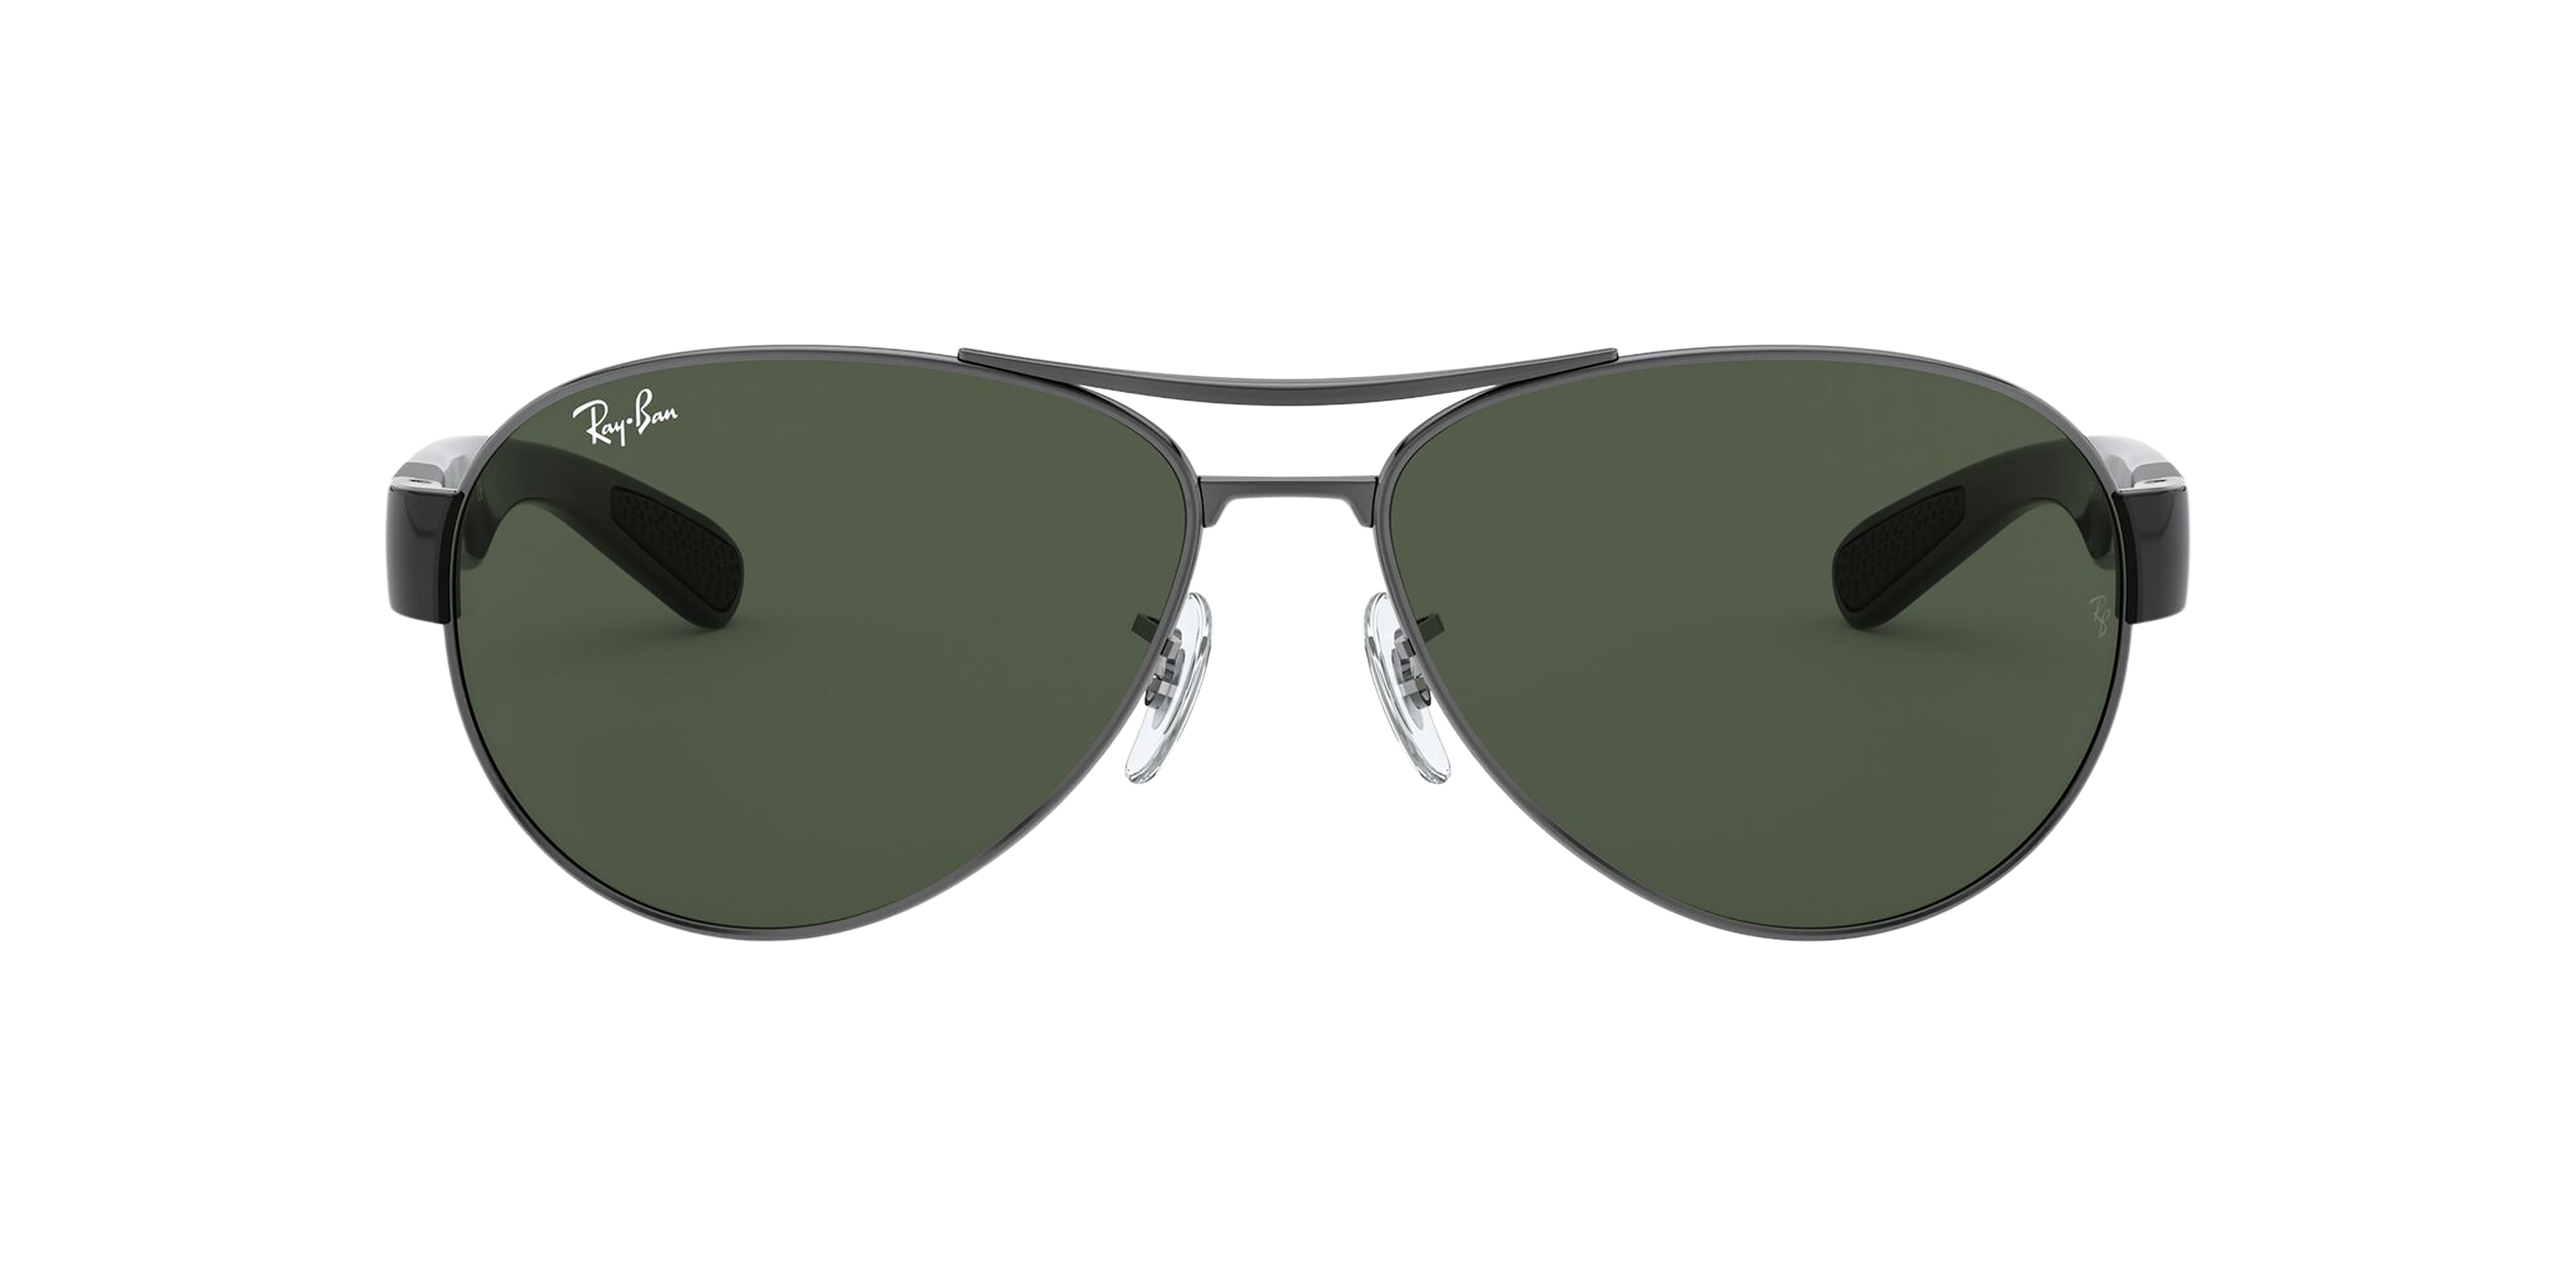 [products.image.front] Ray-Ban RB3509 004/71